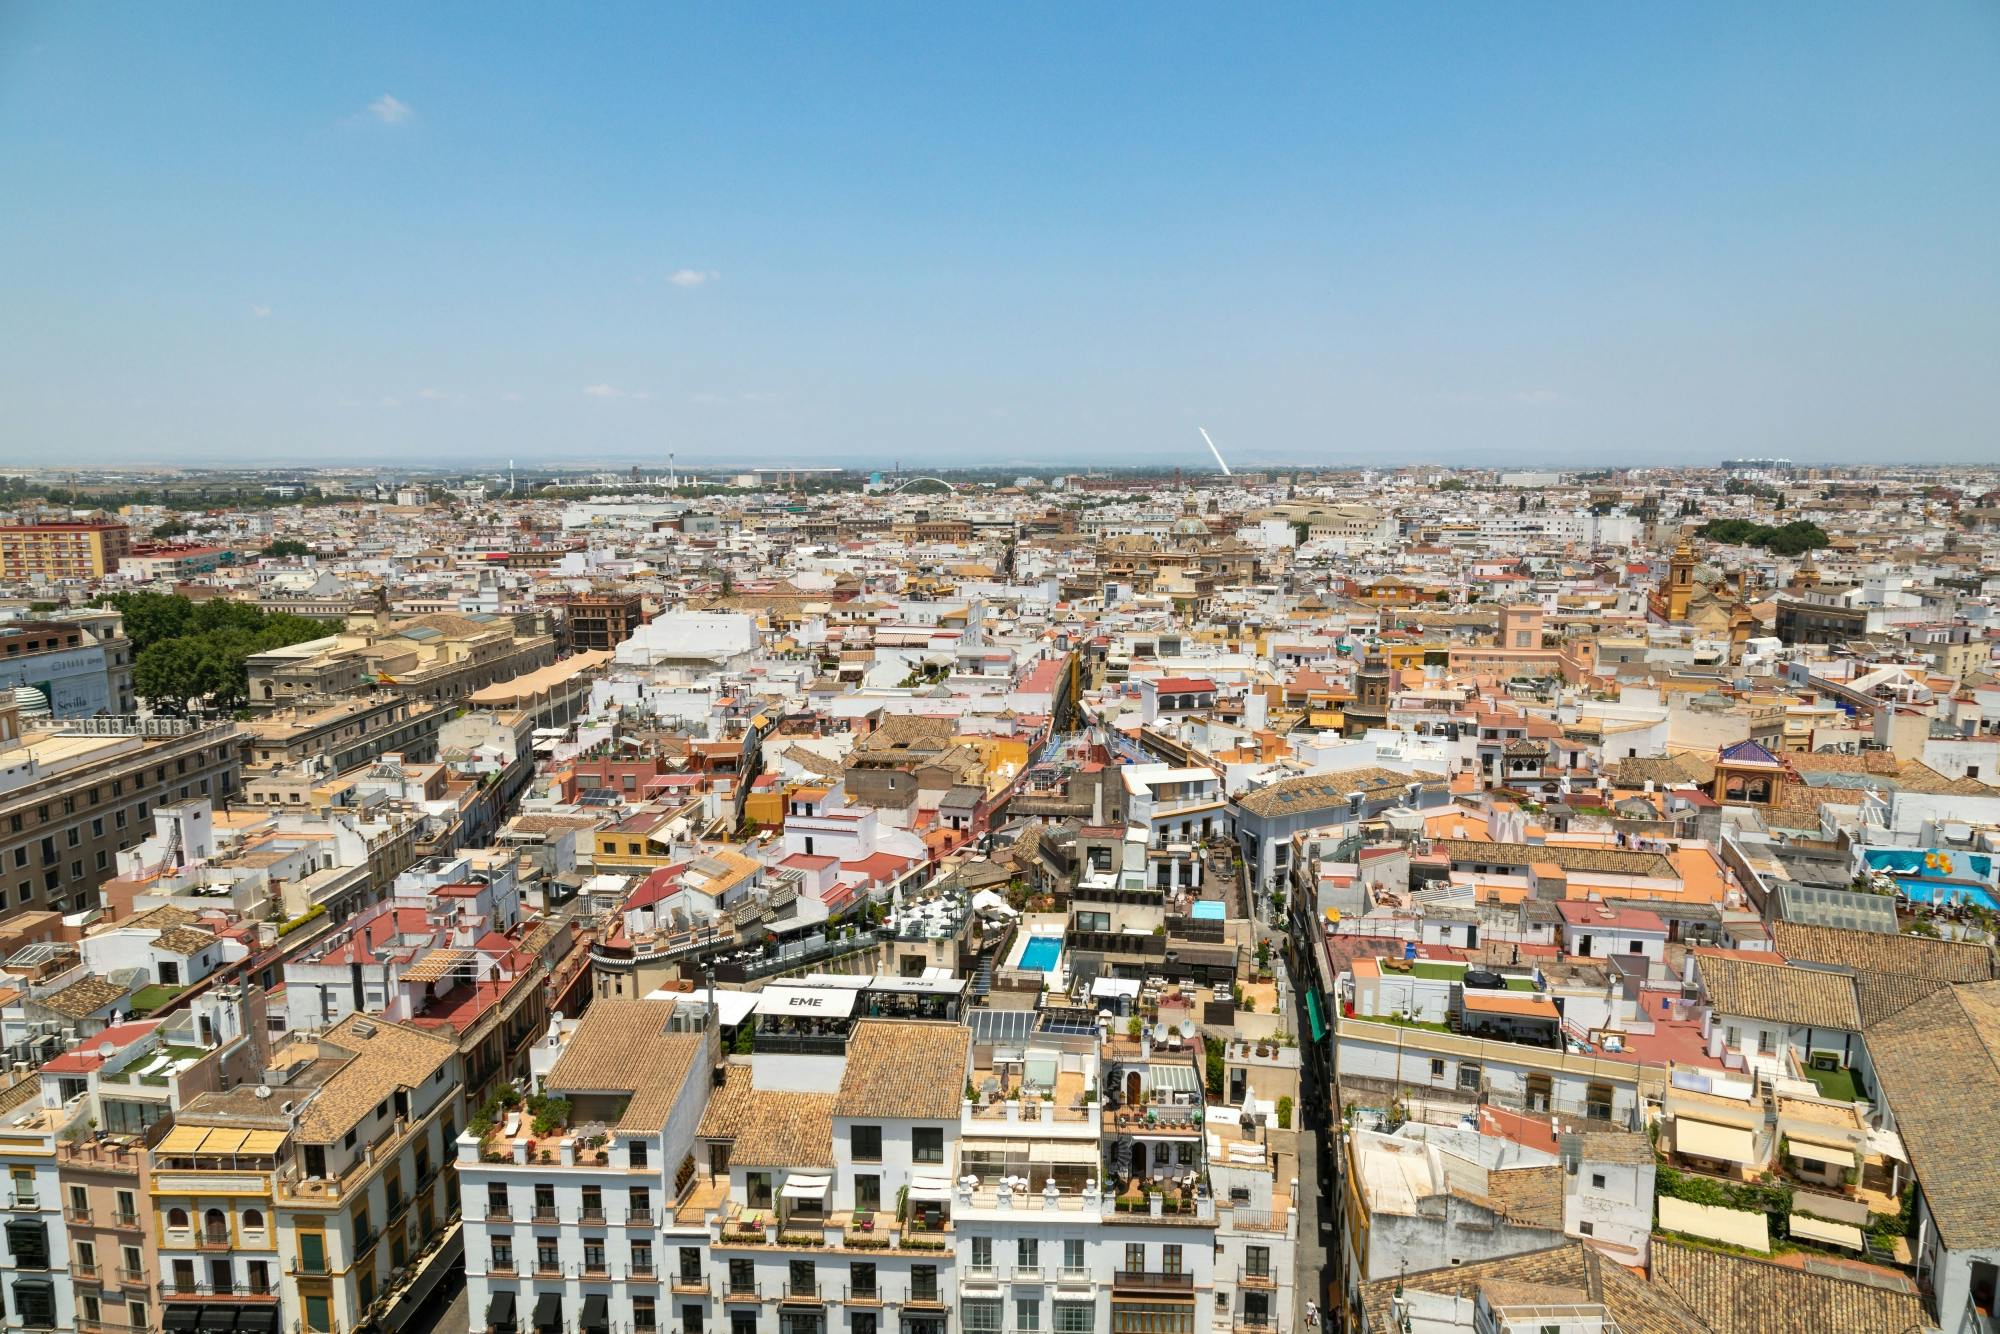 Tour of Seville with Panoramic Bus and Cathedral Visit